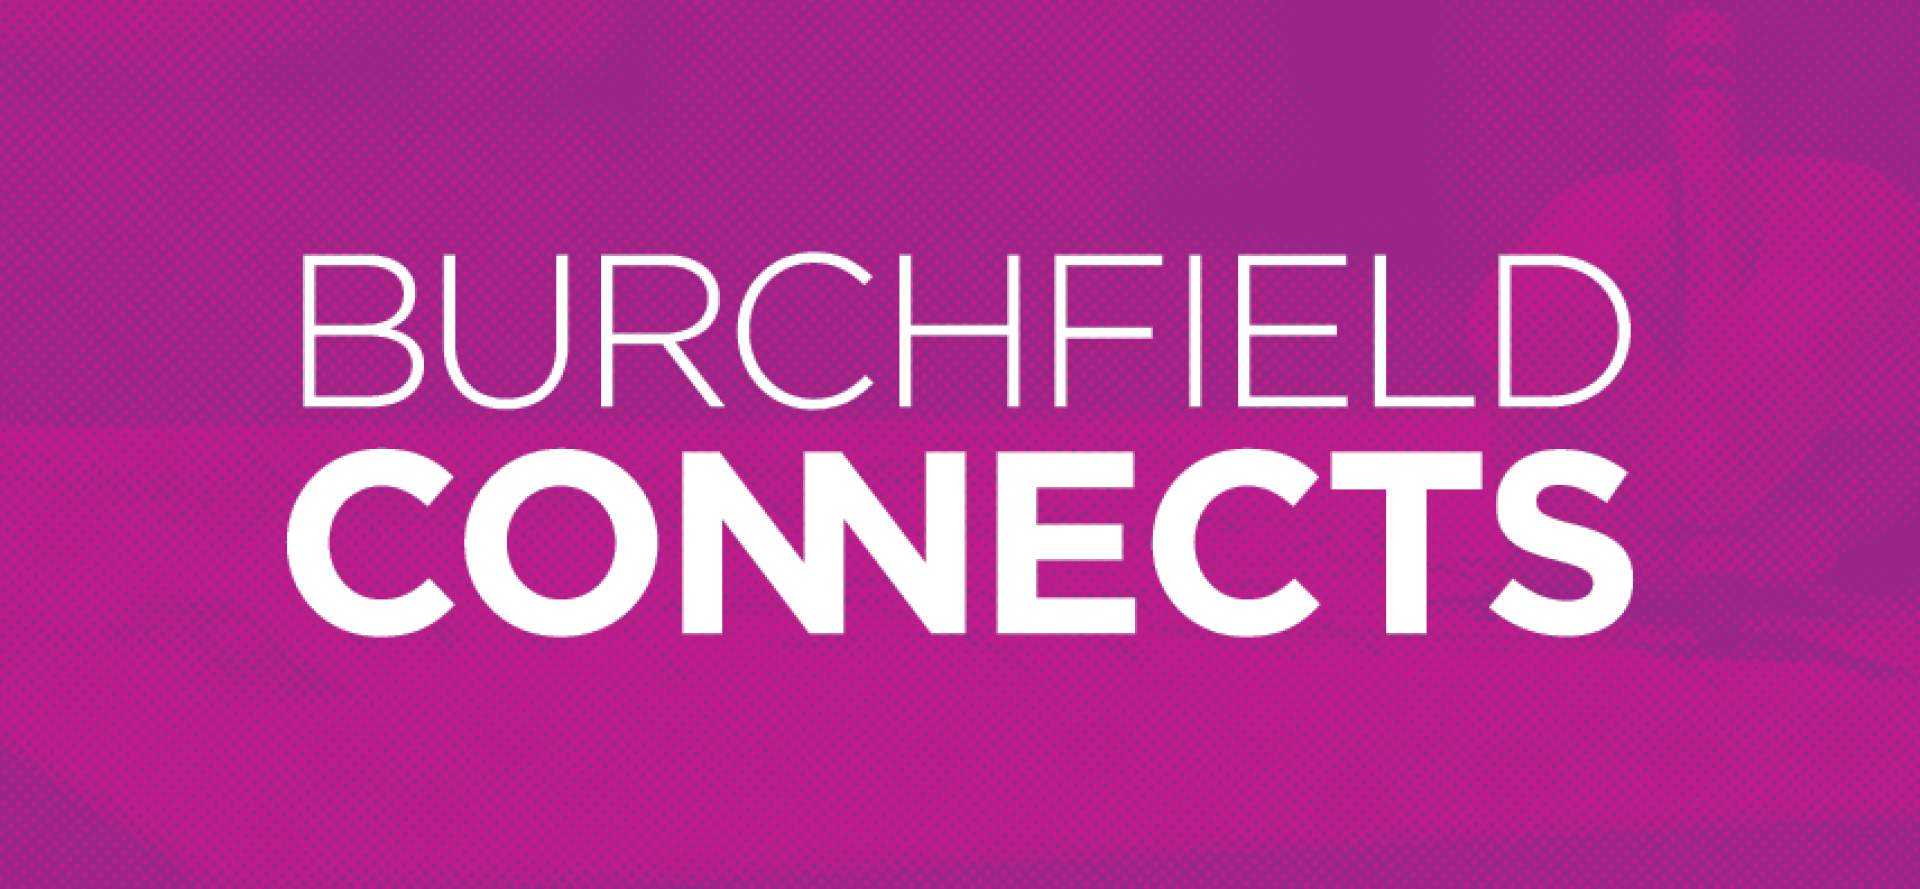 Burchfield Connects Banner